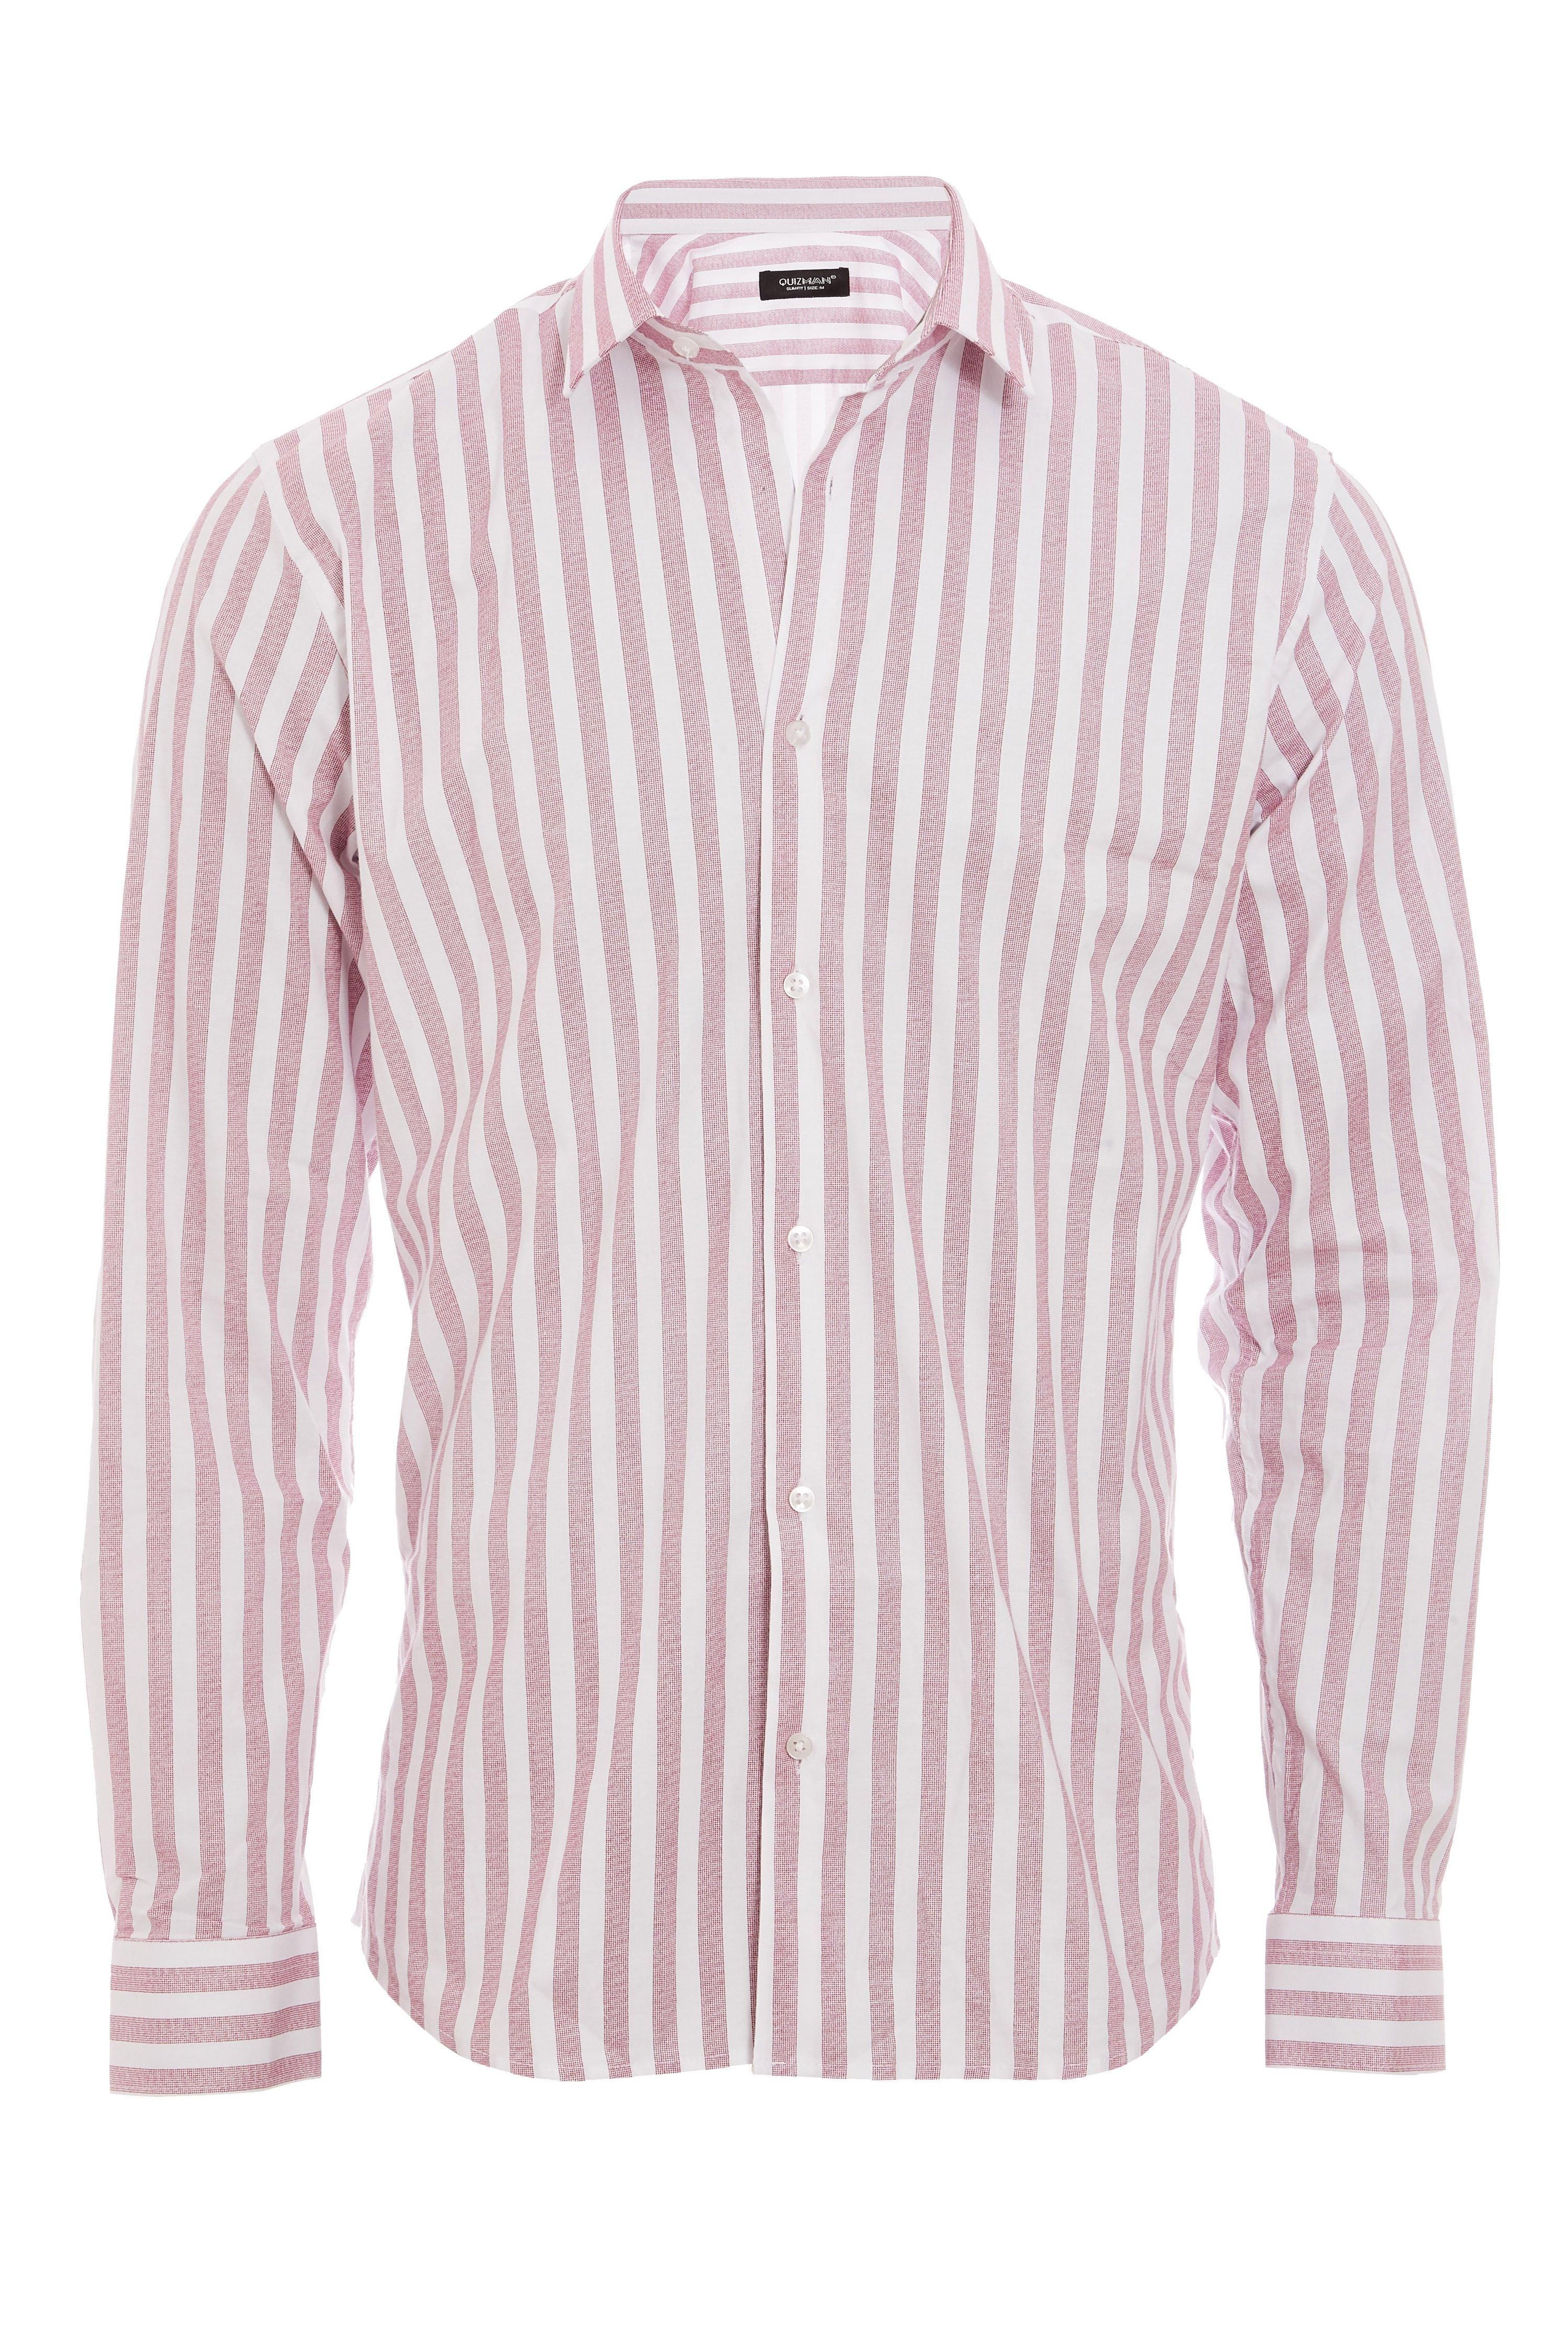 Slim Fit  	Faded Striped Pattern  	Long Sleeved  	Classic Collar  	Button Through Fastening